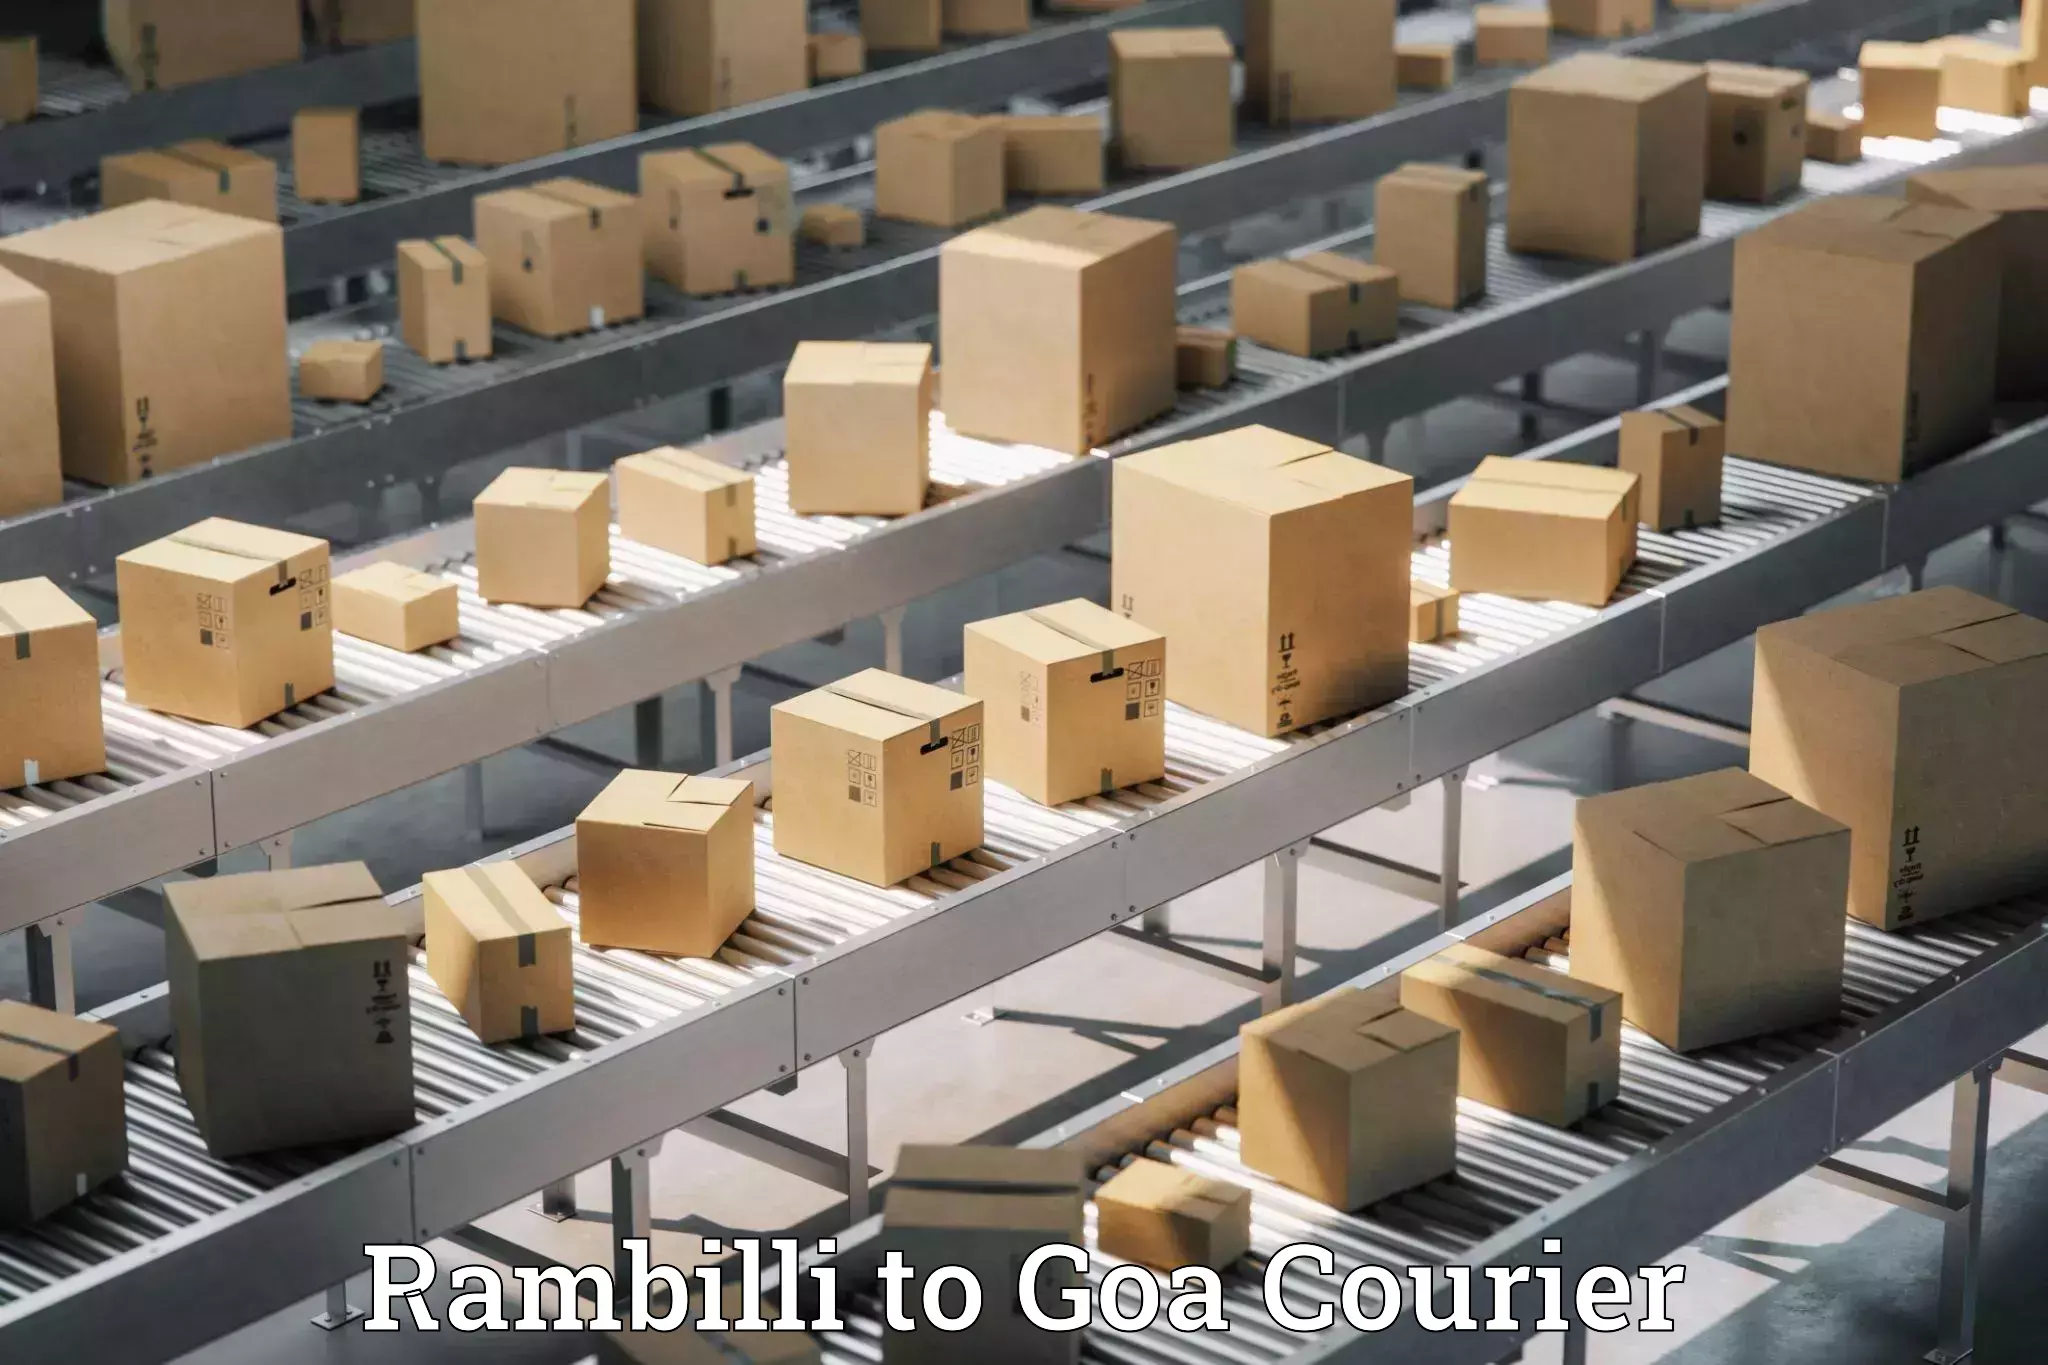 Luggage shipping specialists Rambilli to Goa